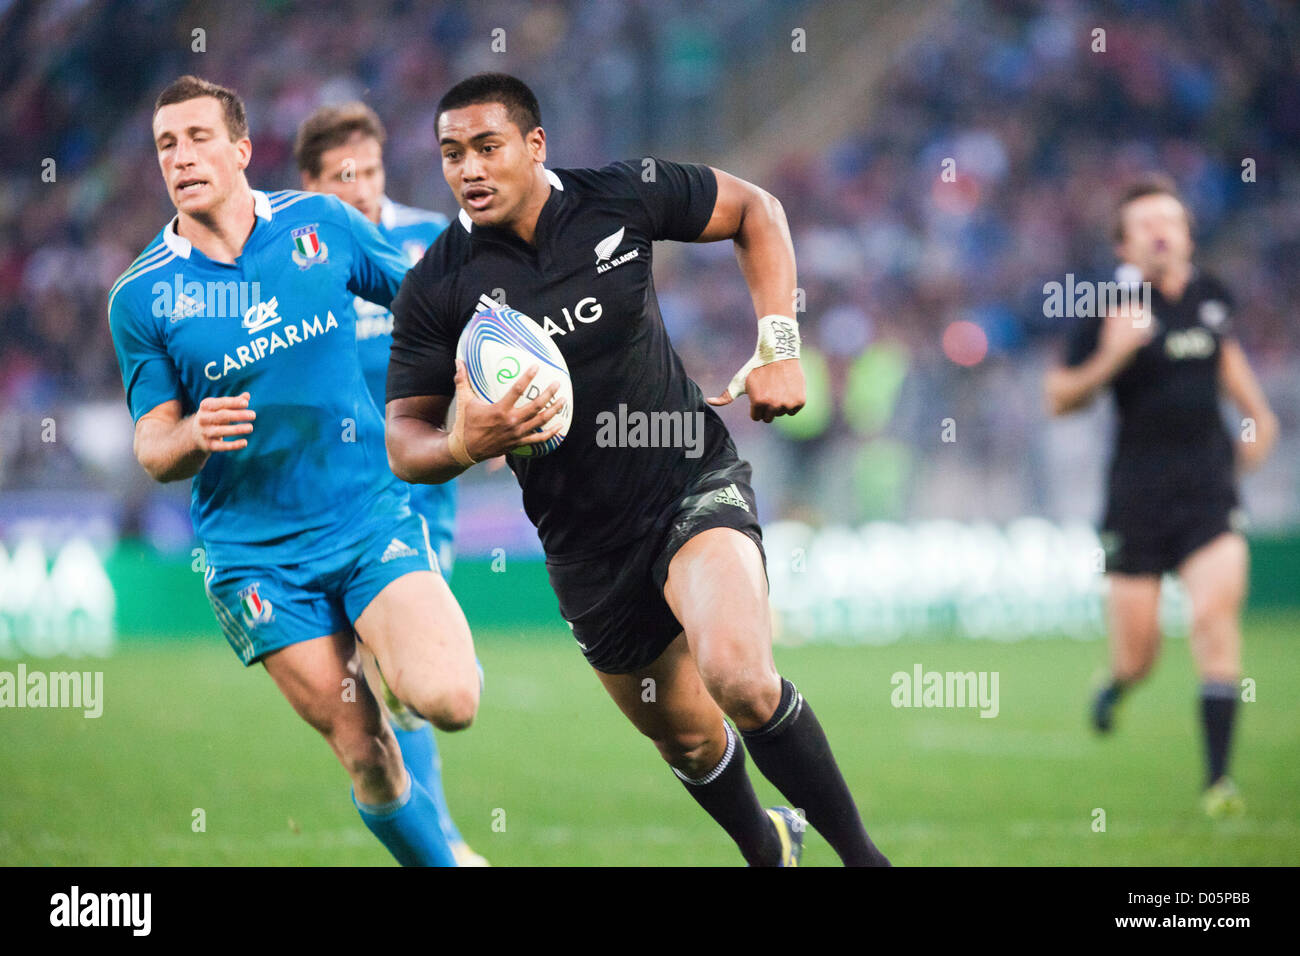 Saturday, Nov. 17th 2012. Olympic stadium, Rome. Italy. International Rugby test match Italy v. New Zealand. - Two time try scorer Julian Savea runs in to score a try for New Zealand in the second half of the game. Stock Photo